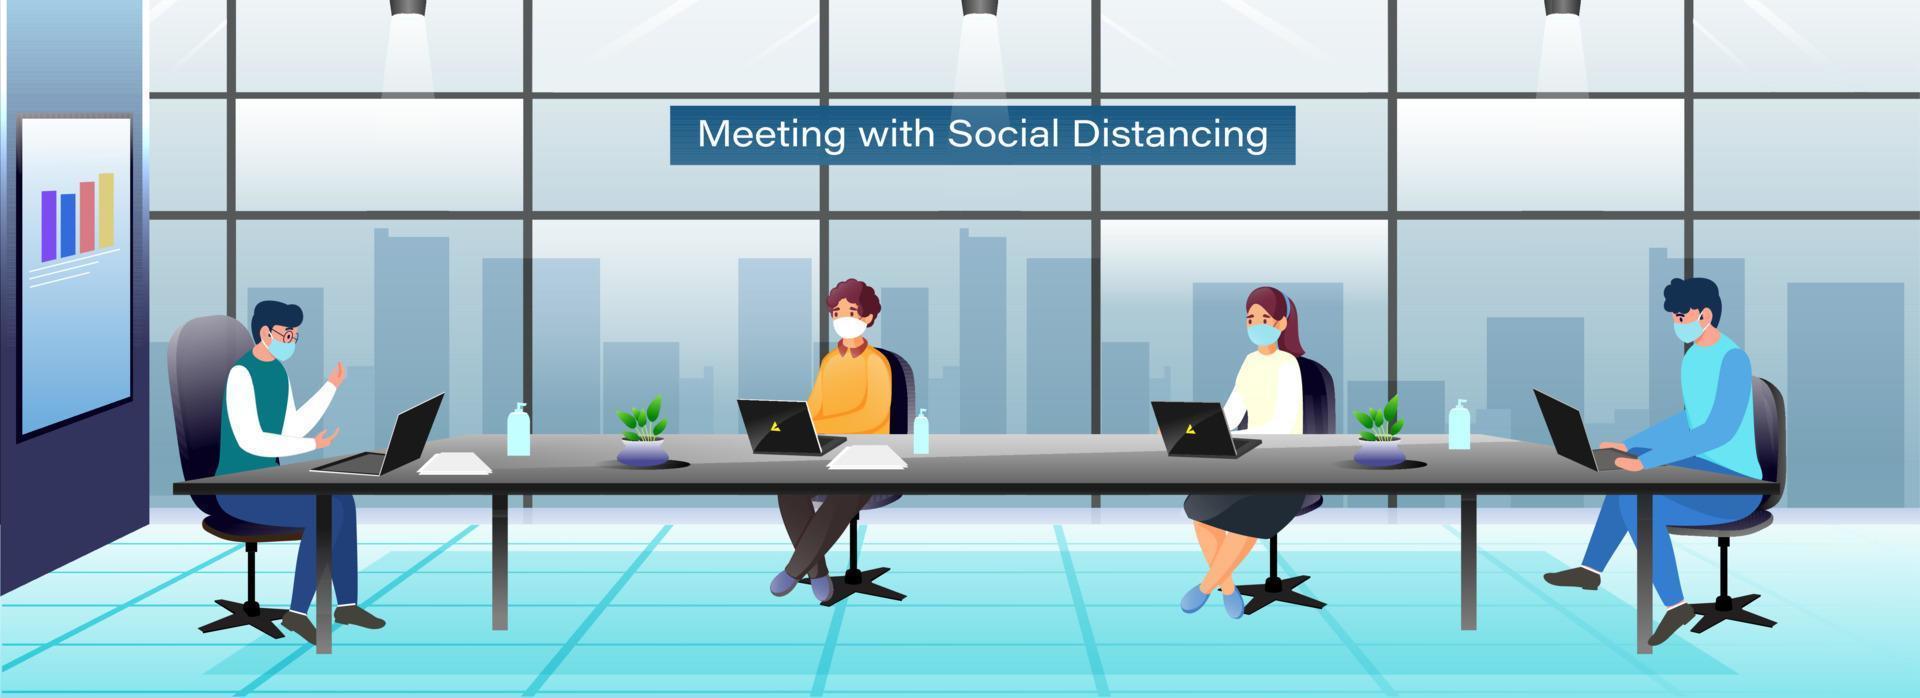 Business People Wear Protective Mask With Maintaining Social Distance In Meeting Room During Coronavirus. Advertising Header Or Banner Design. vector